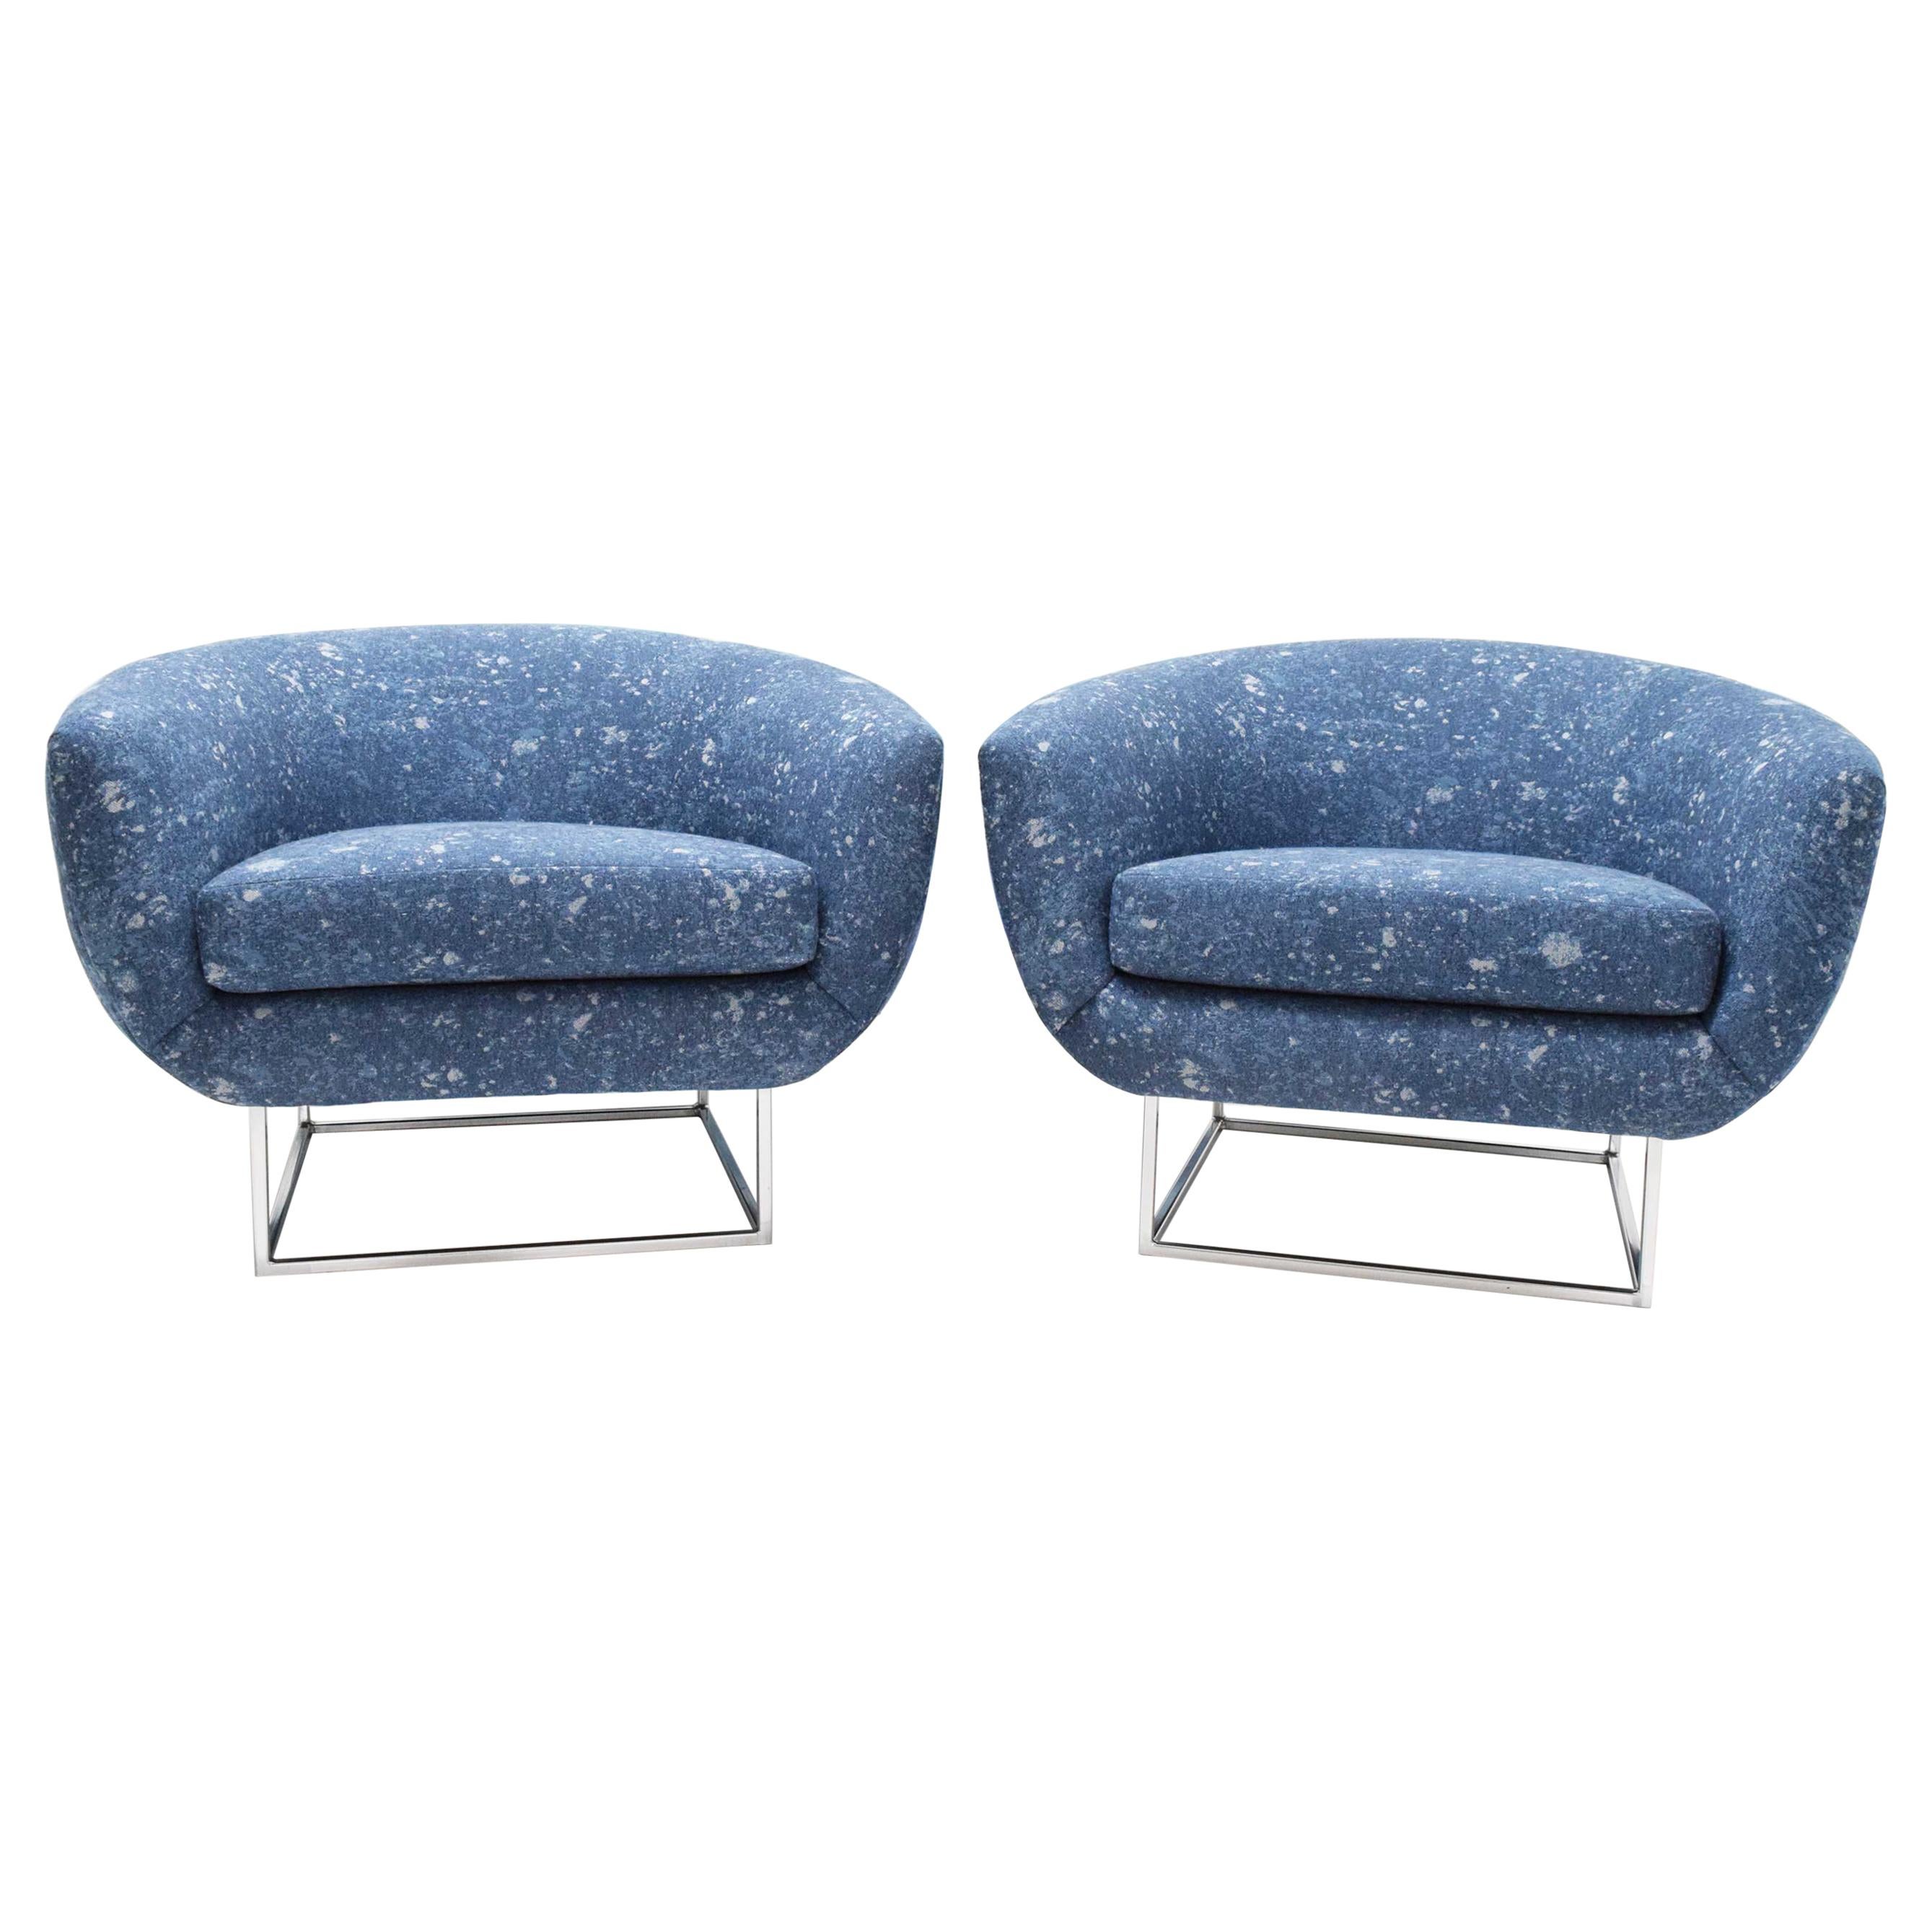 Milo Baughman 1970s Lounge Chairs in Blue Upholstery by Donghia